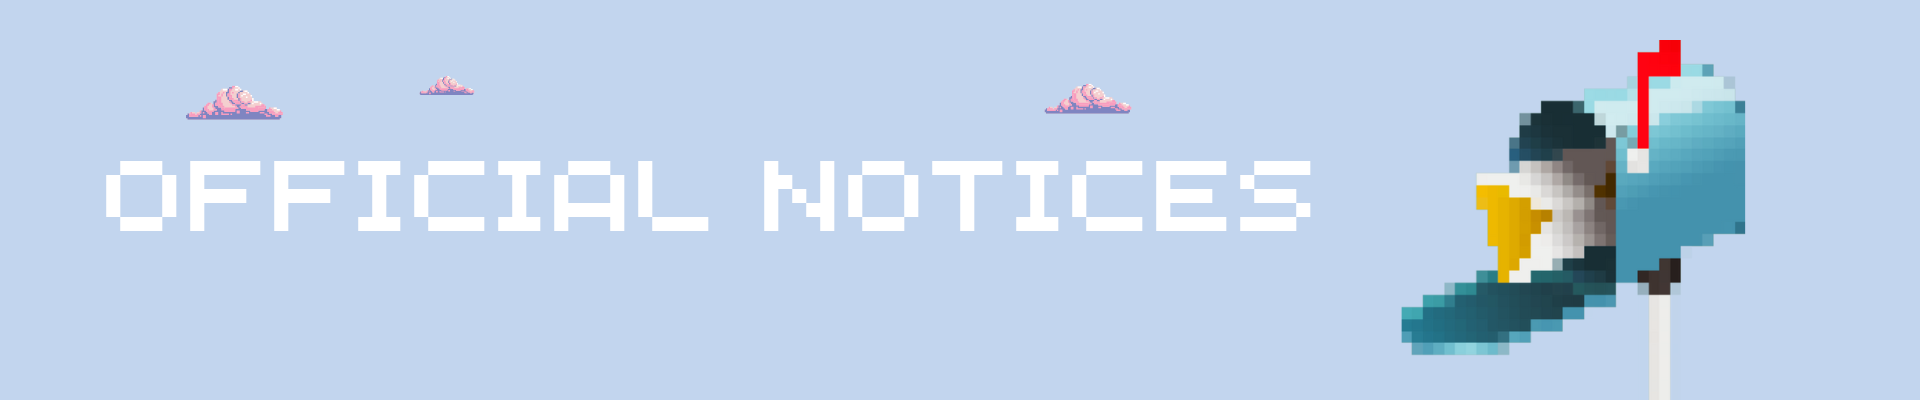 Decorative banner for Official Notices